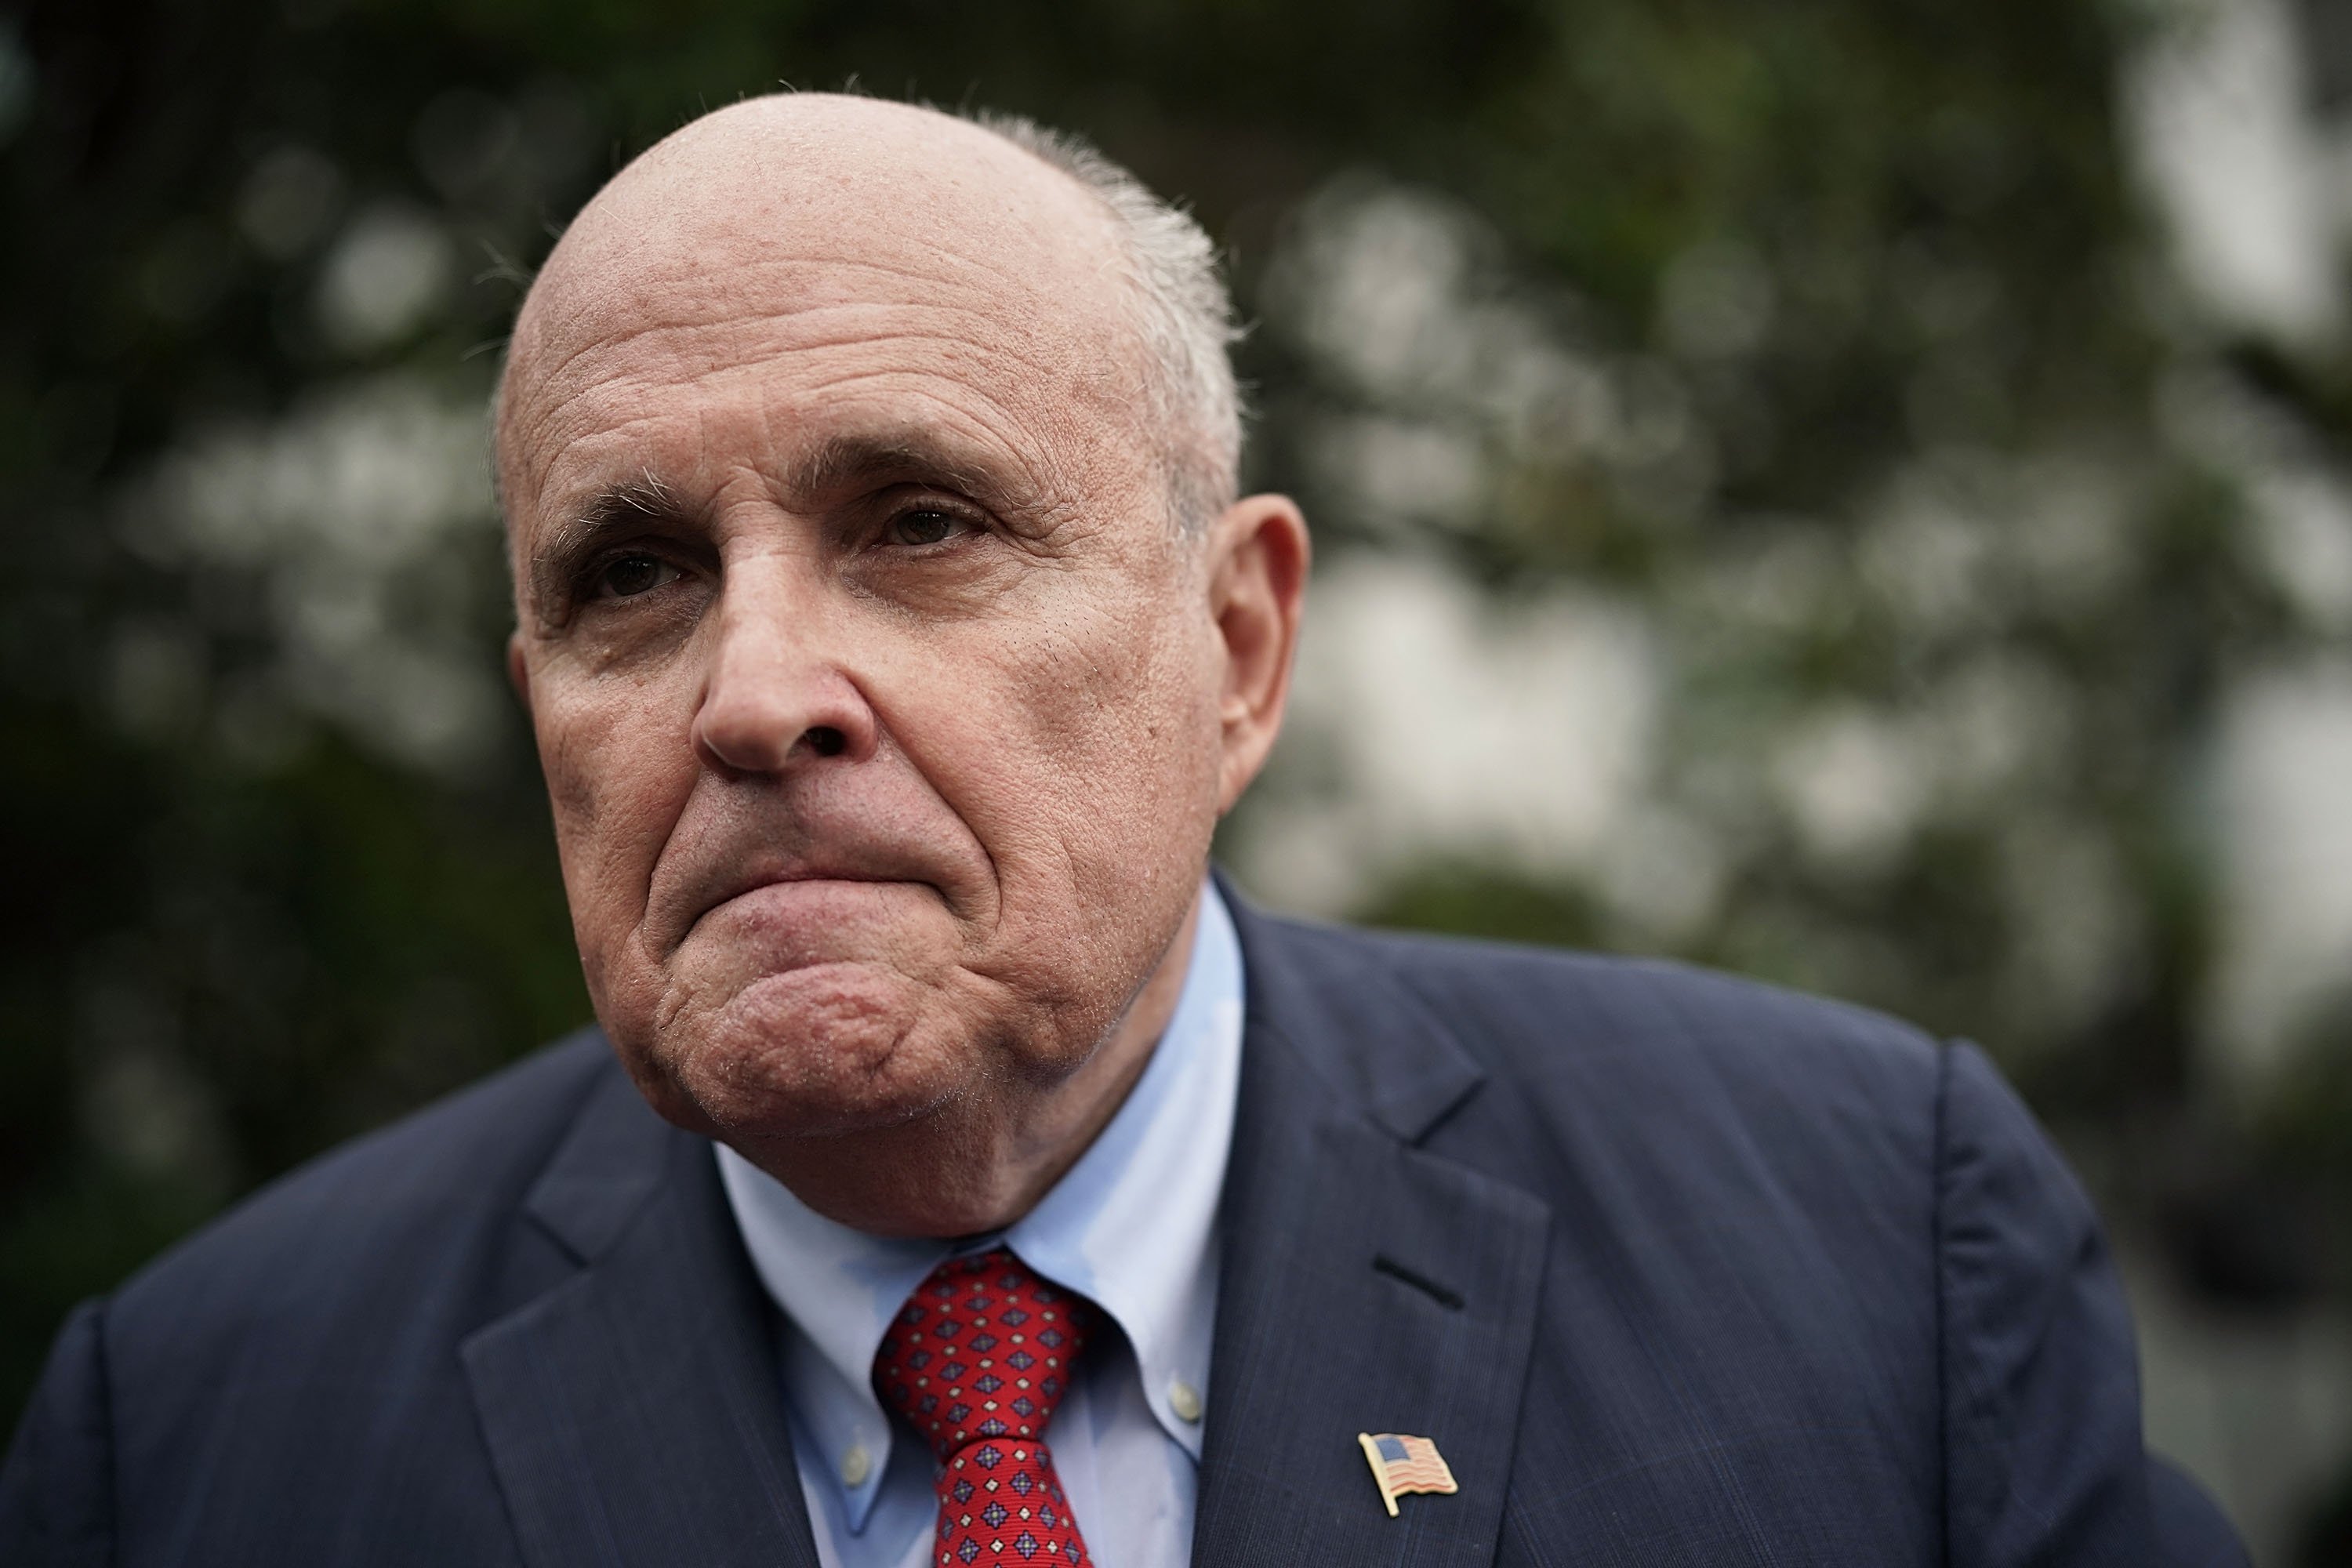 Rudy Giuliani, former New York City mayor and current lawyer for U.S. President Donald Trump, speaks to members of the media during a White House Sports and Fitness Day at the South Lawn of the White House May 30, 2018 in Washington, DC. President Trump hosted the event to encourage children to participate in sports and make youth sports more accessible to economically disadvantaged students. (Photo by Alex Wong/Getty Images)